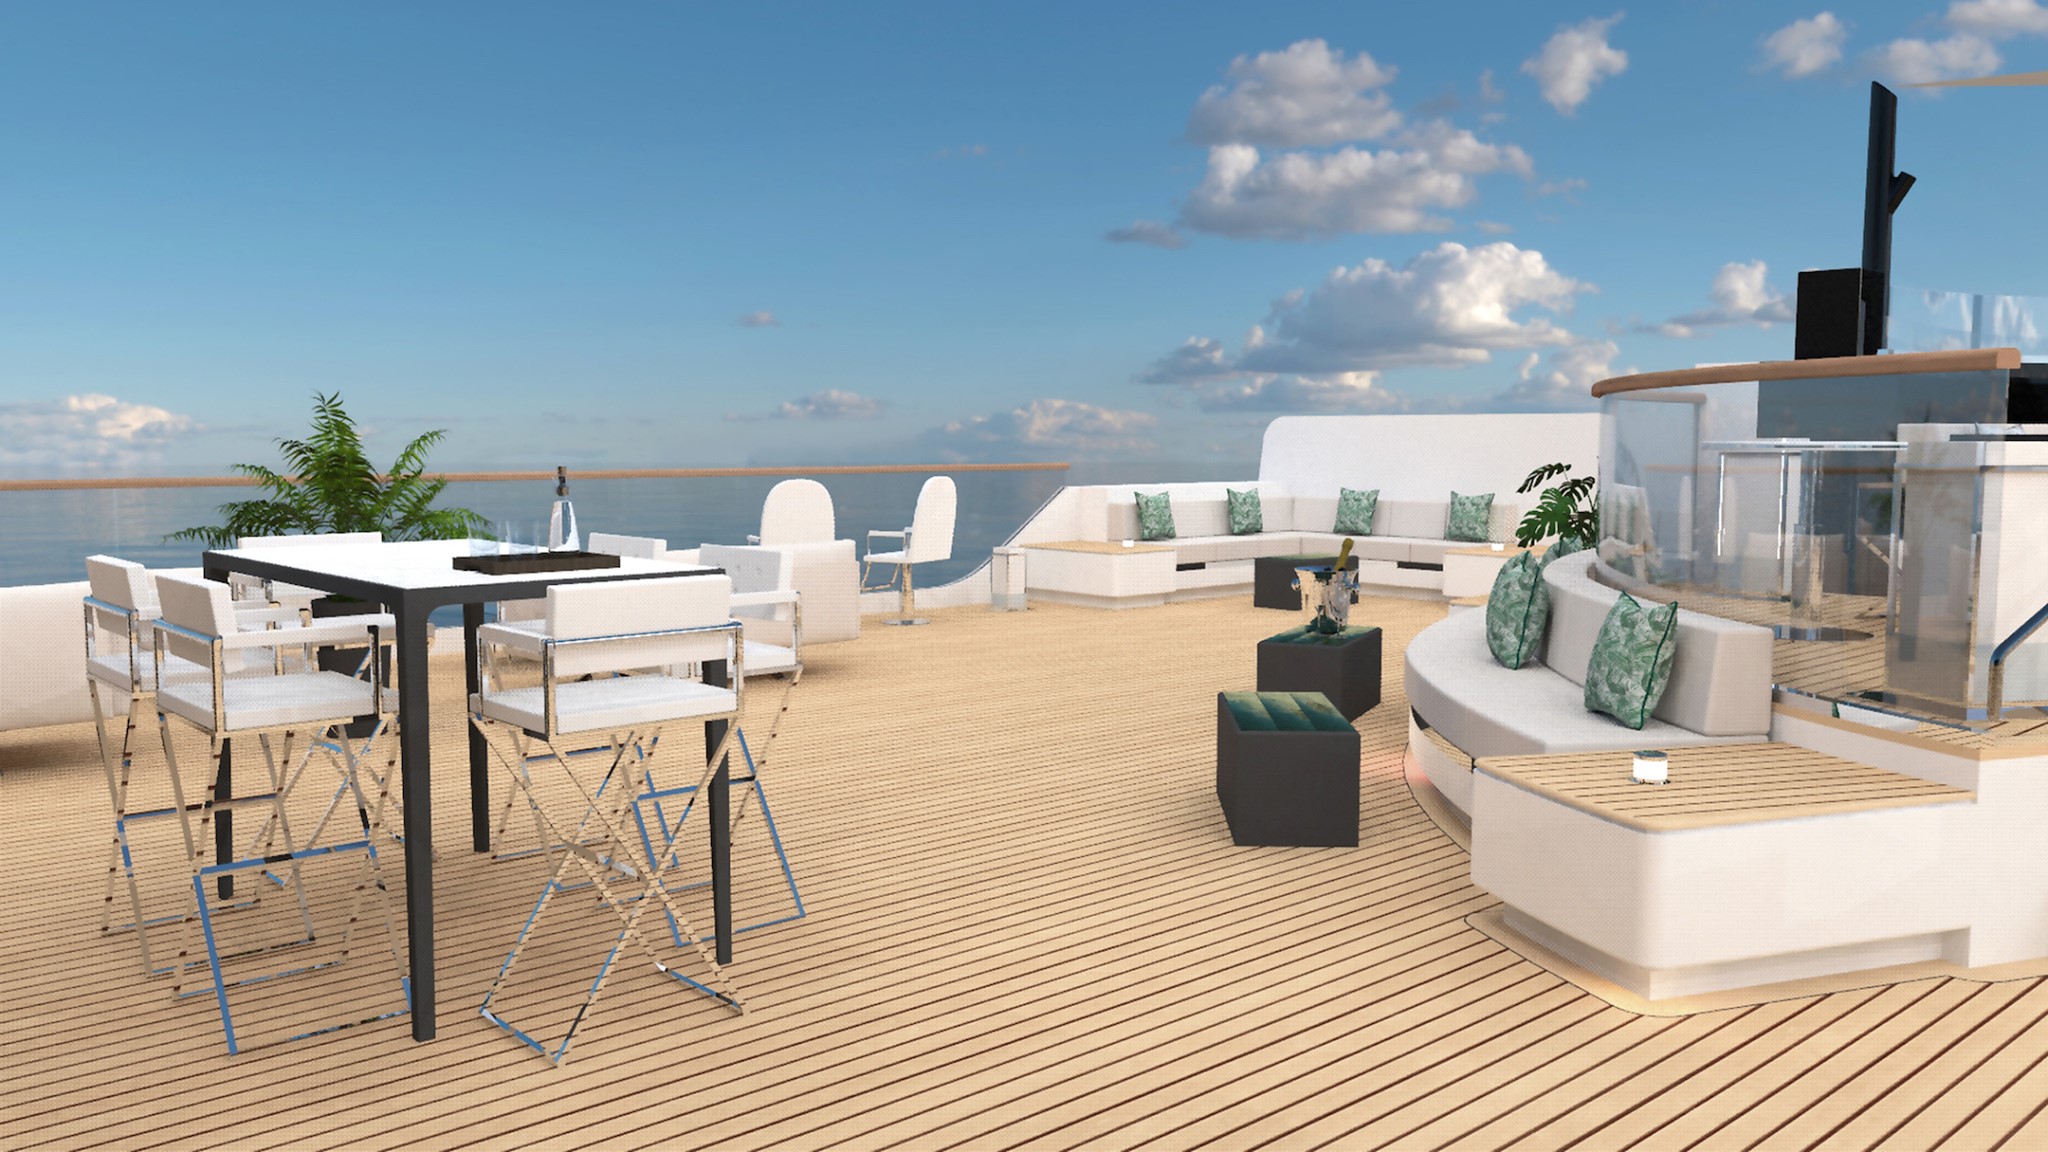 The Ritz-Carlton Yacht Collection has revealed details of the expansive culinary offerings available to guests aboard Evrima, the first of three yachts from The Ritz-Carlton Yacht Collection.